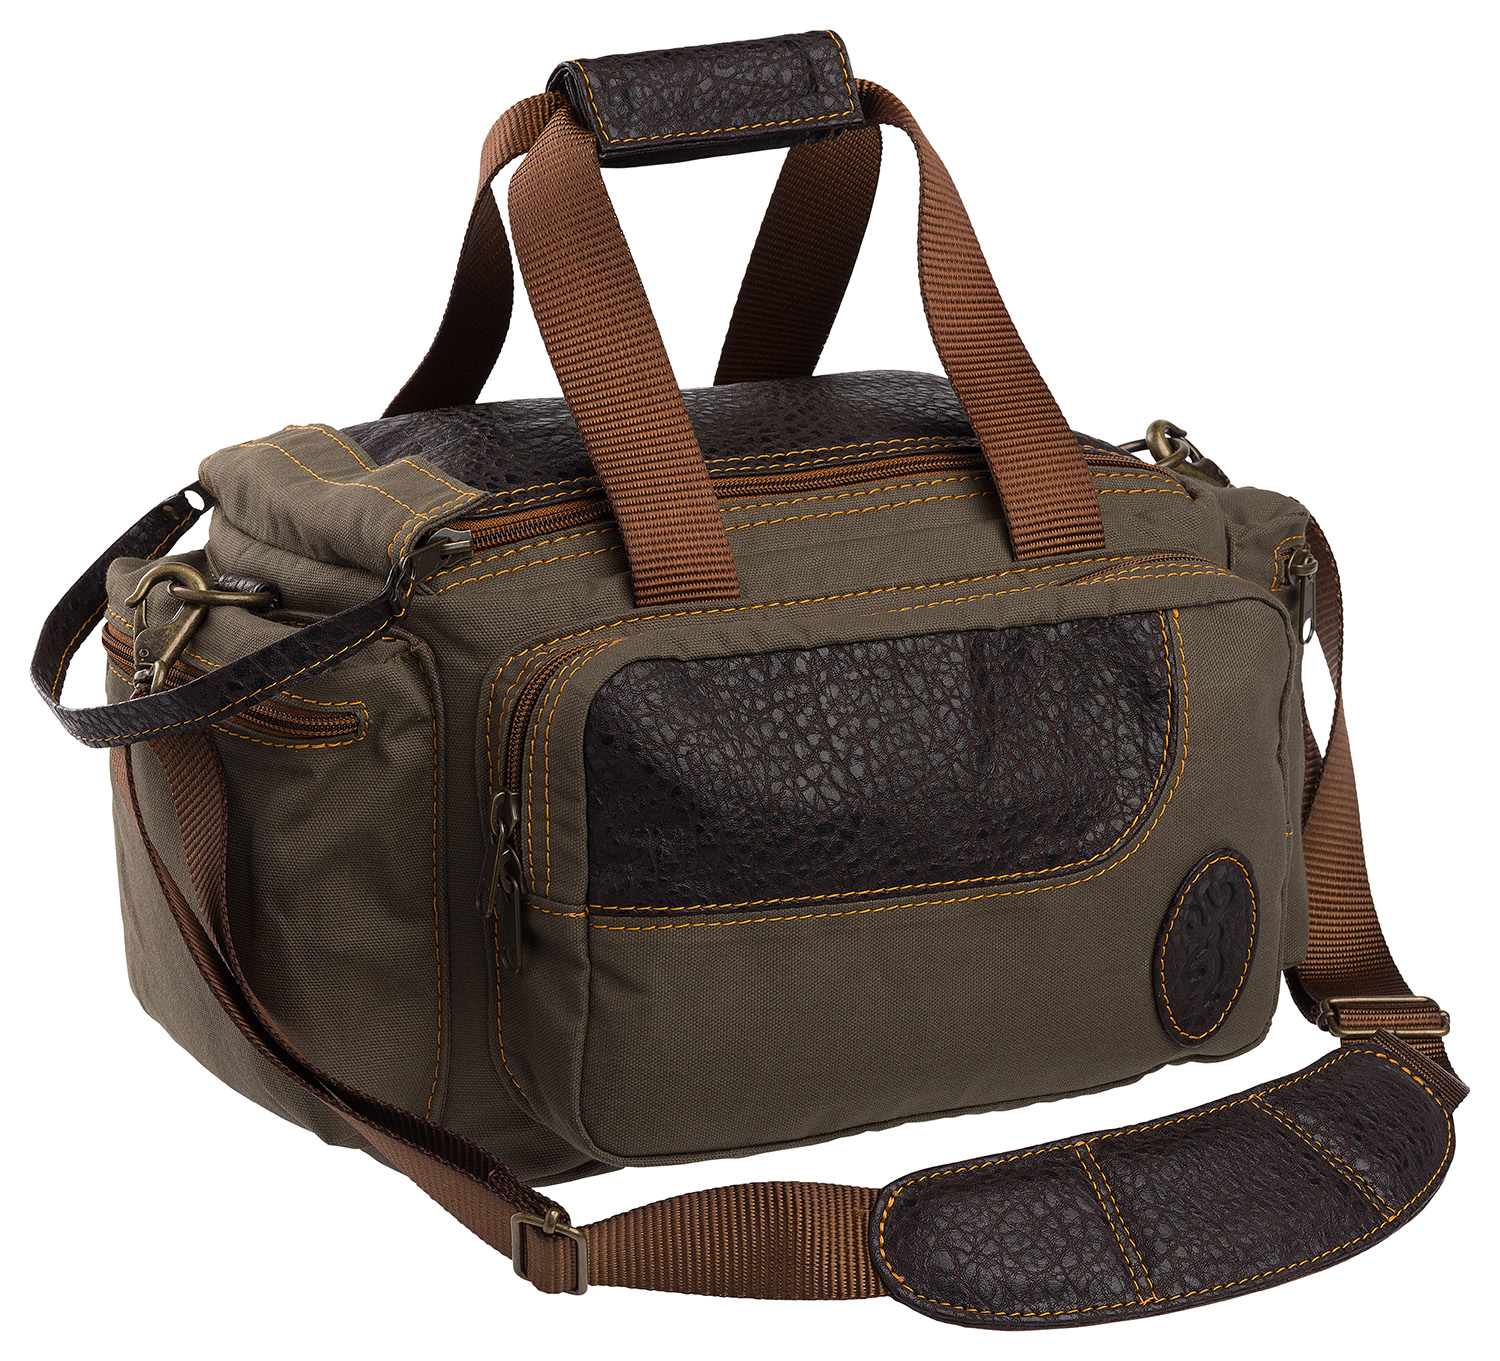 Browning 121504841 Laredo Shooting Bag Olive Canvas/Leather